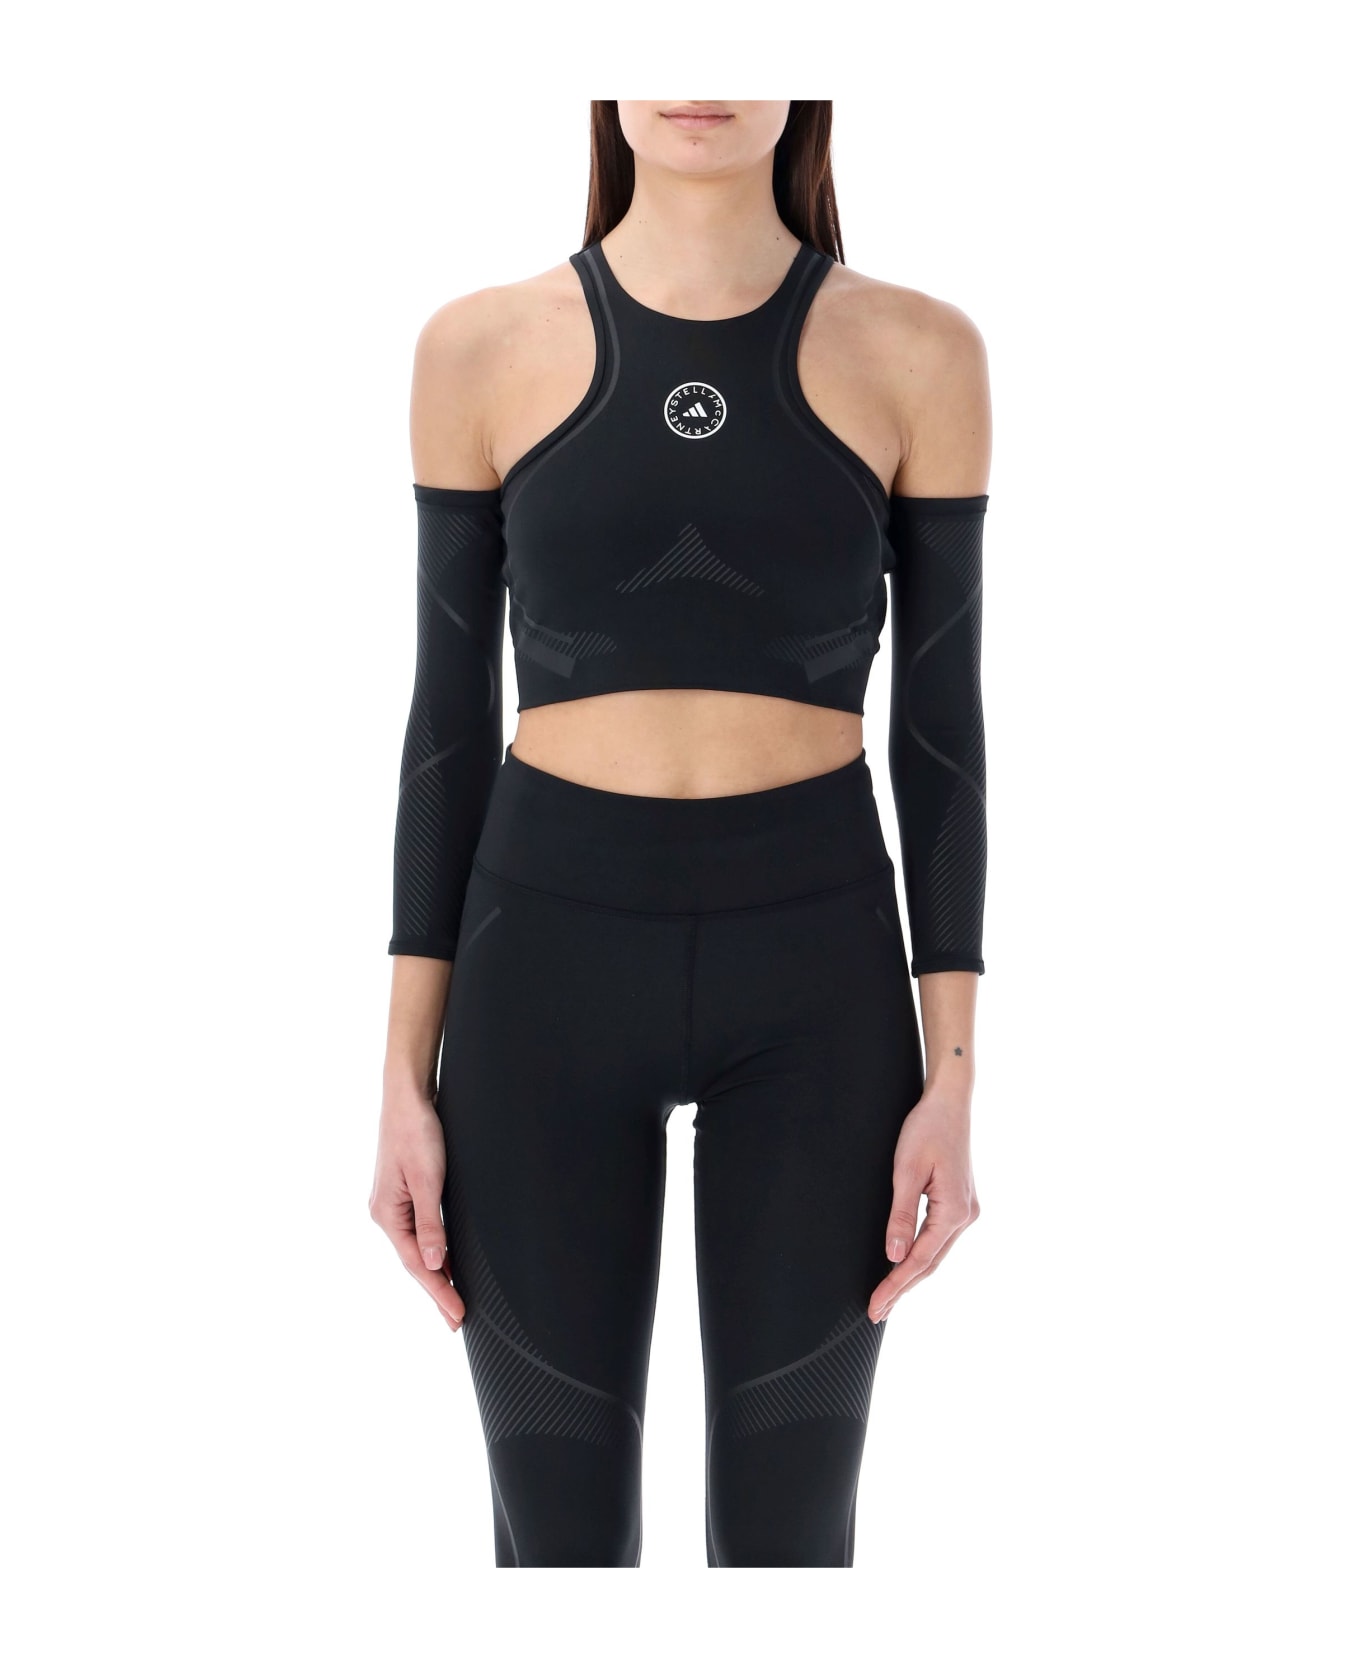 Adidas by Stella McCartney Truepace Running Crop Top With Arm Guards - Black トップス